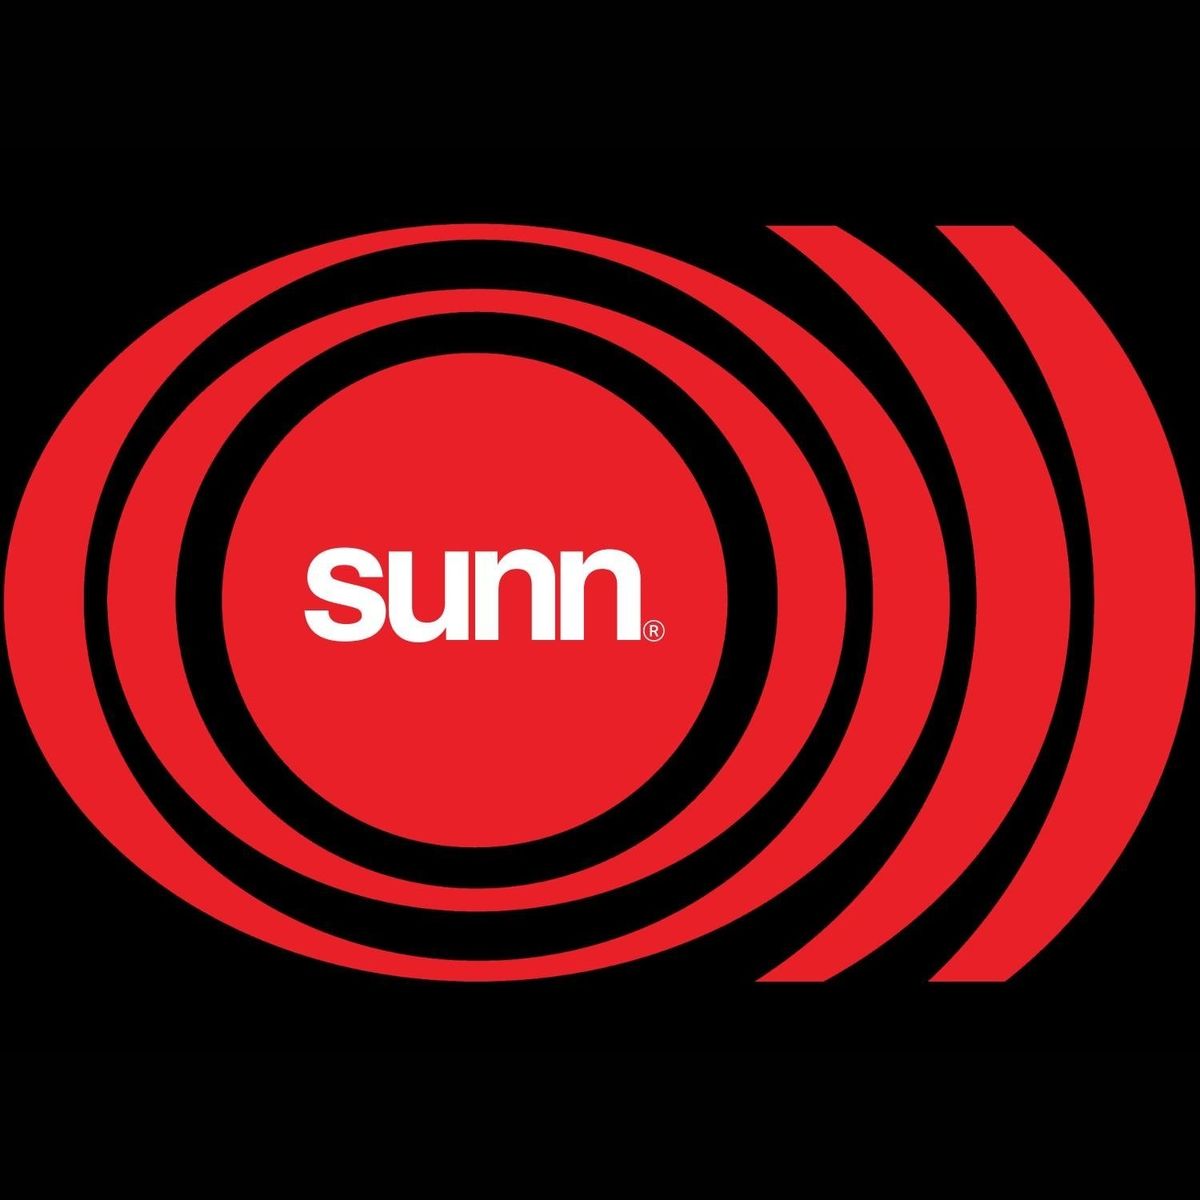 Fender and Mission Engineering Announce the Return of Sunn Amps